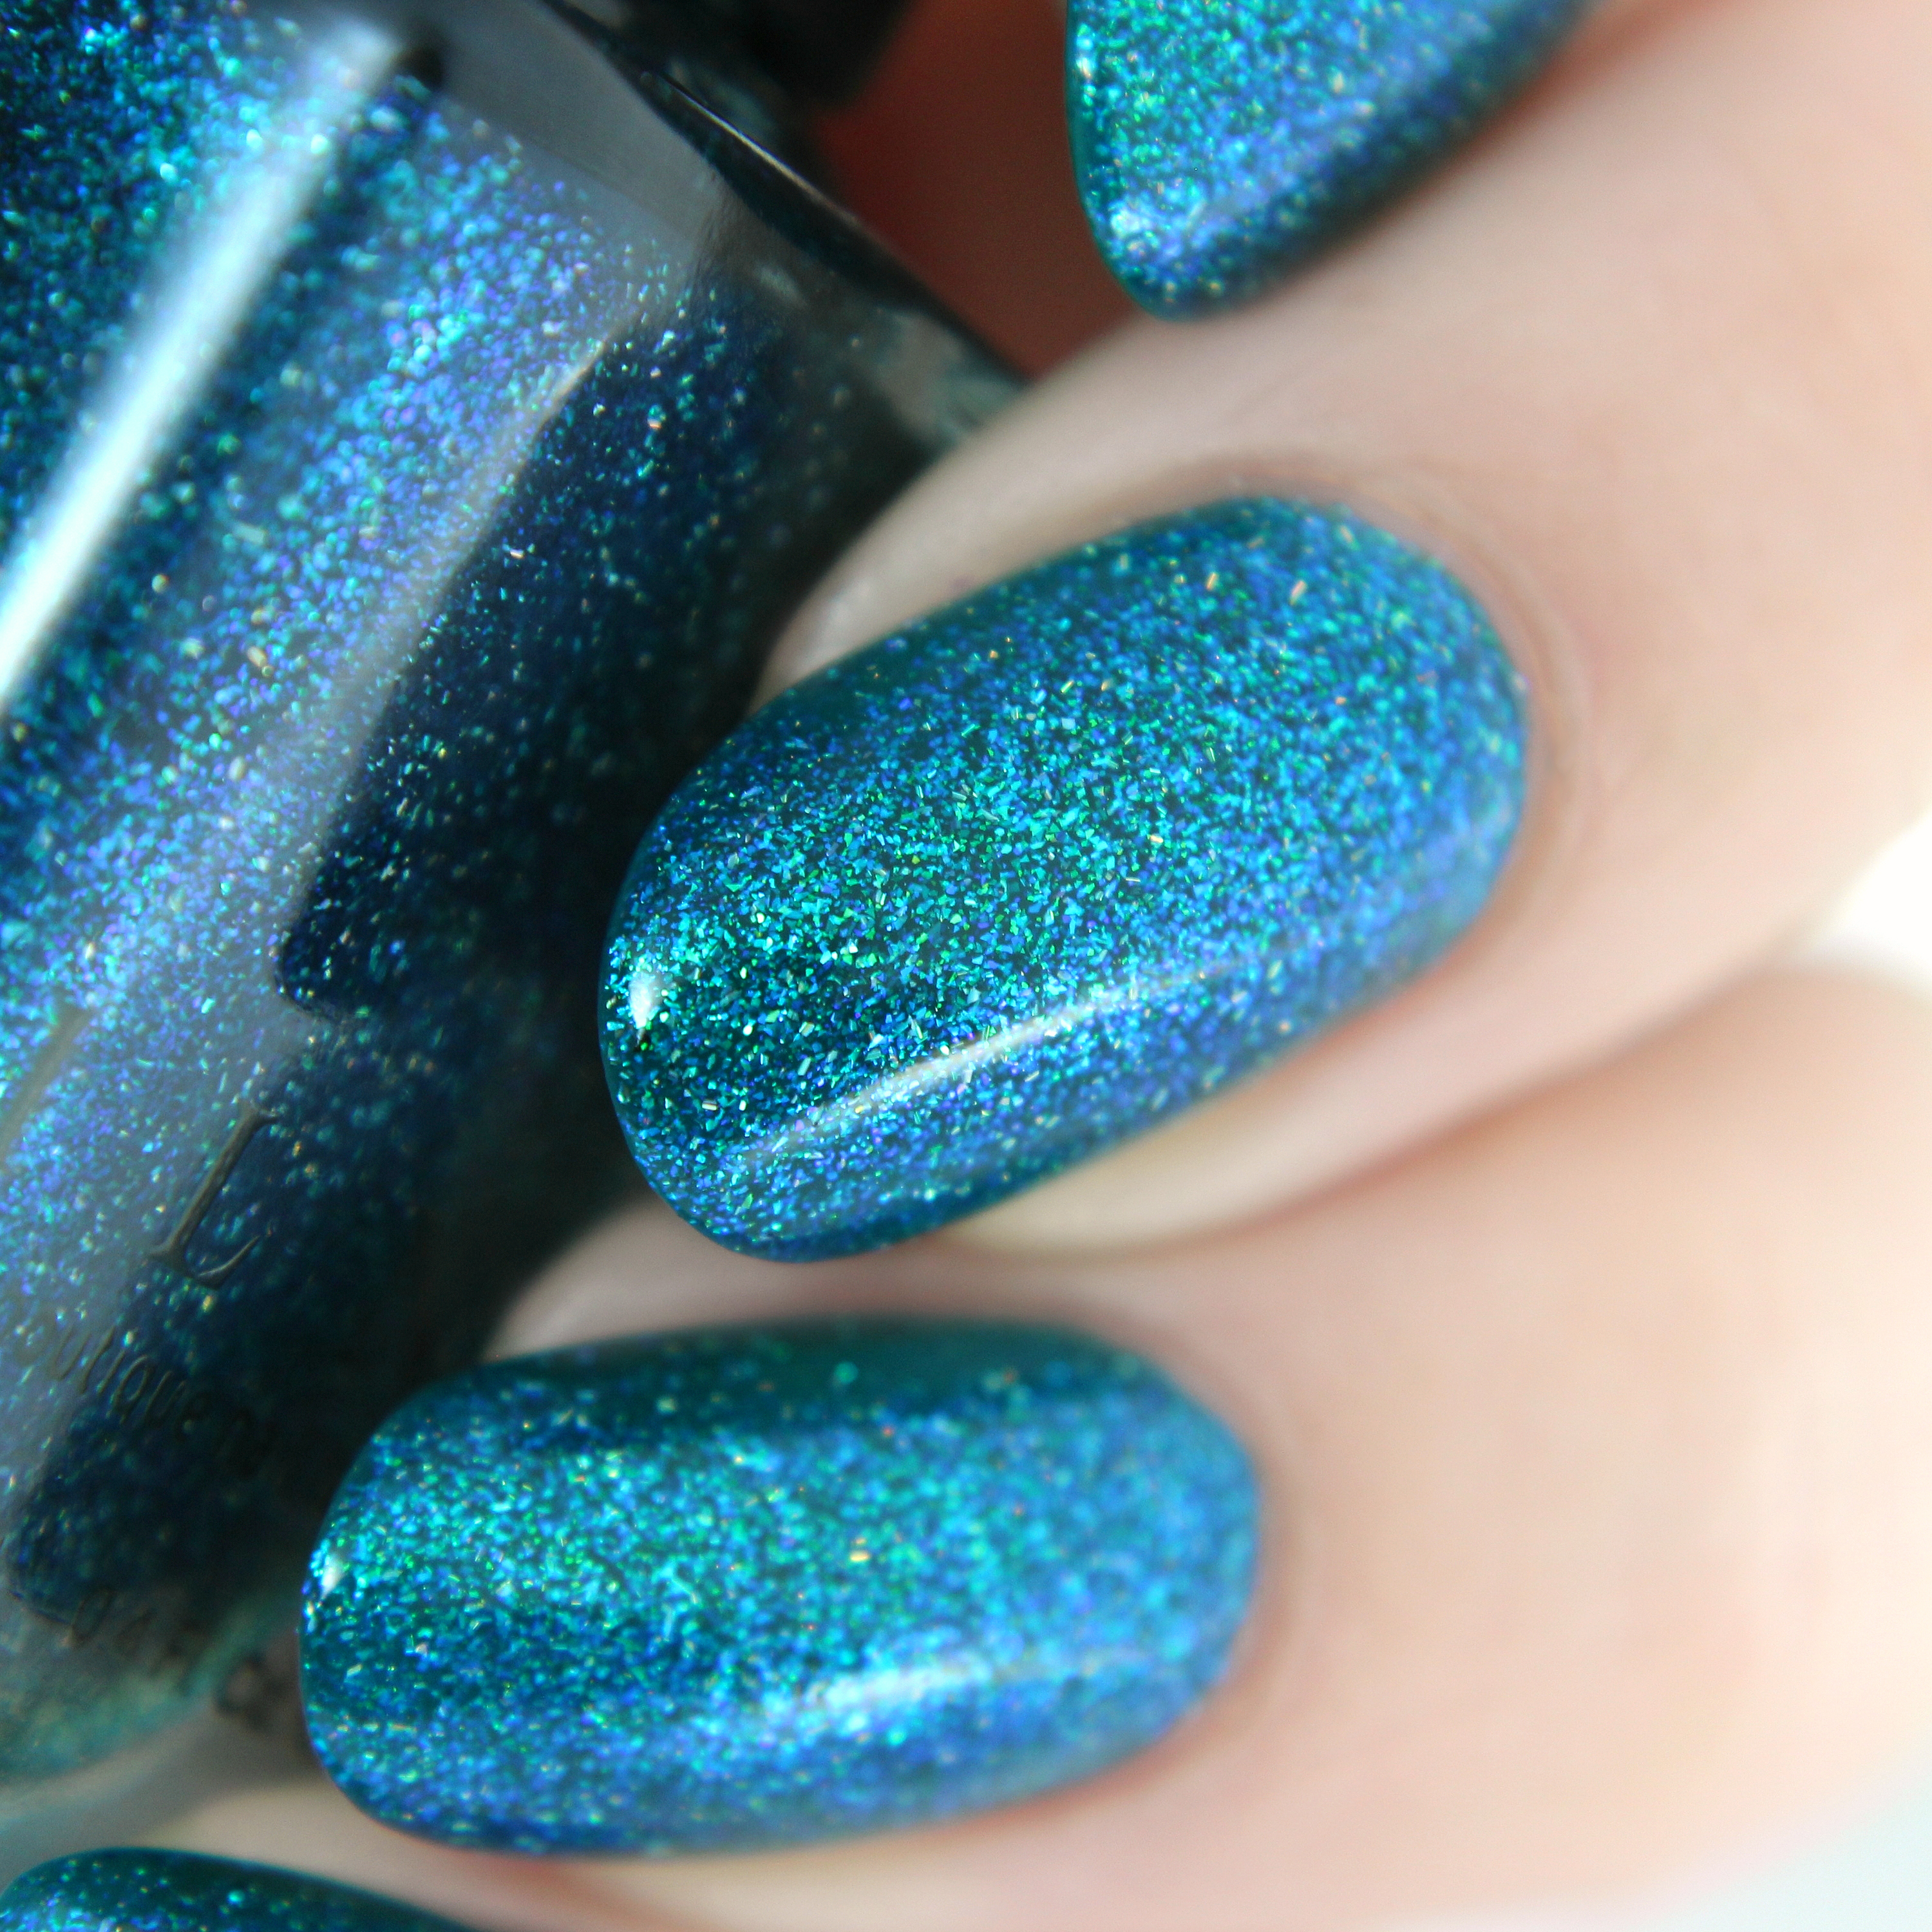 Party Favor - Vivid Teal Holographic Nail Polish by ILNP